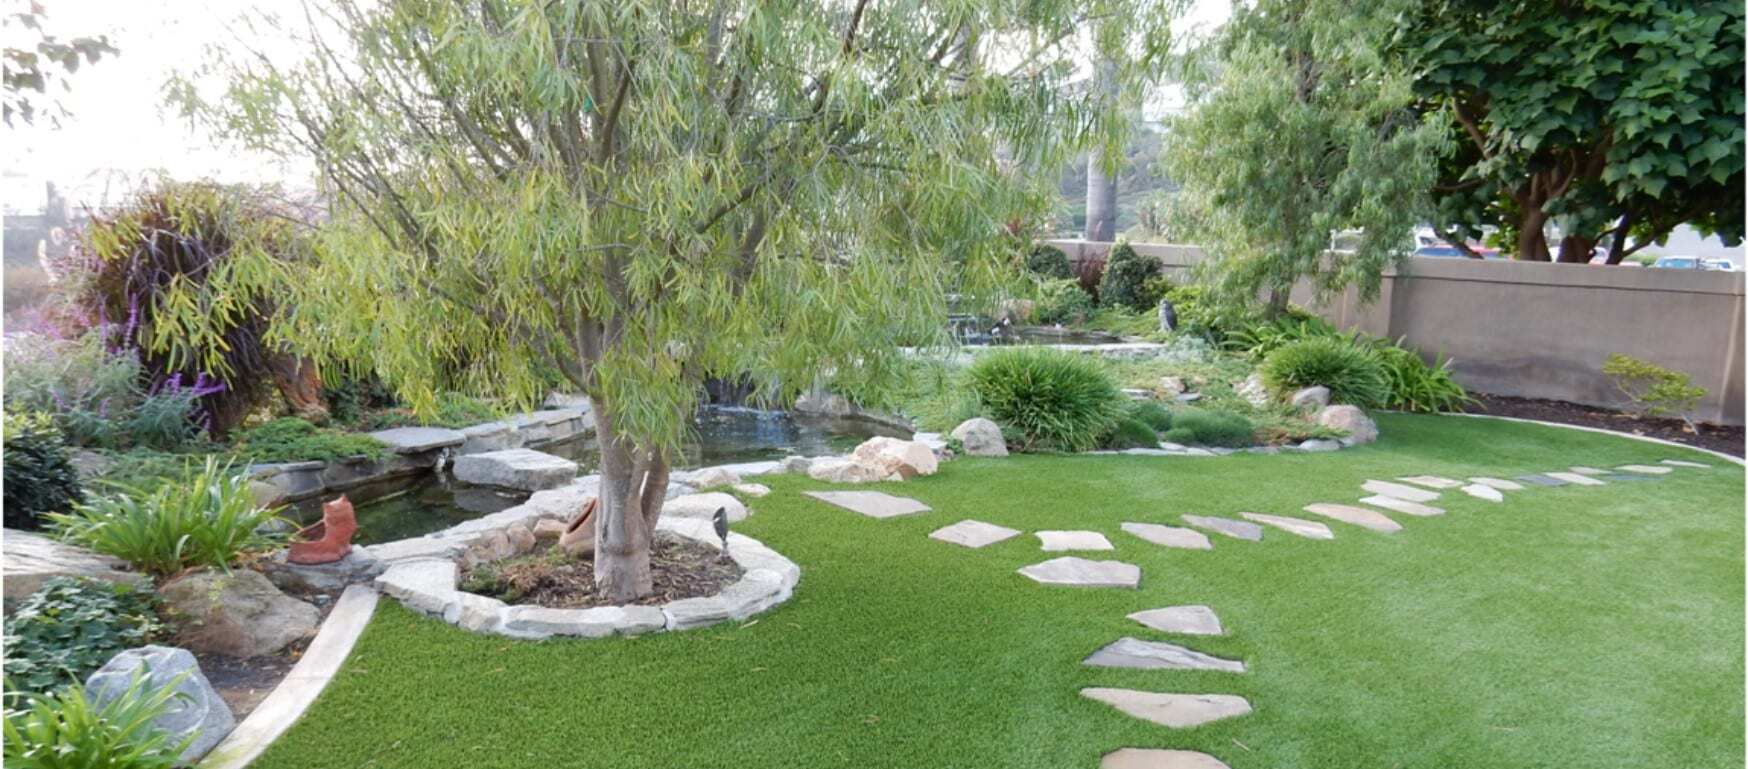 Beaumont Artificial Grass, Pavers, The Ultimate Landscape - Green-R Turf